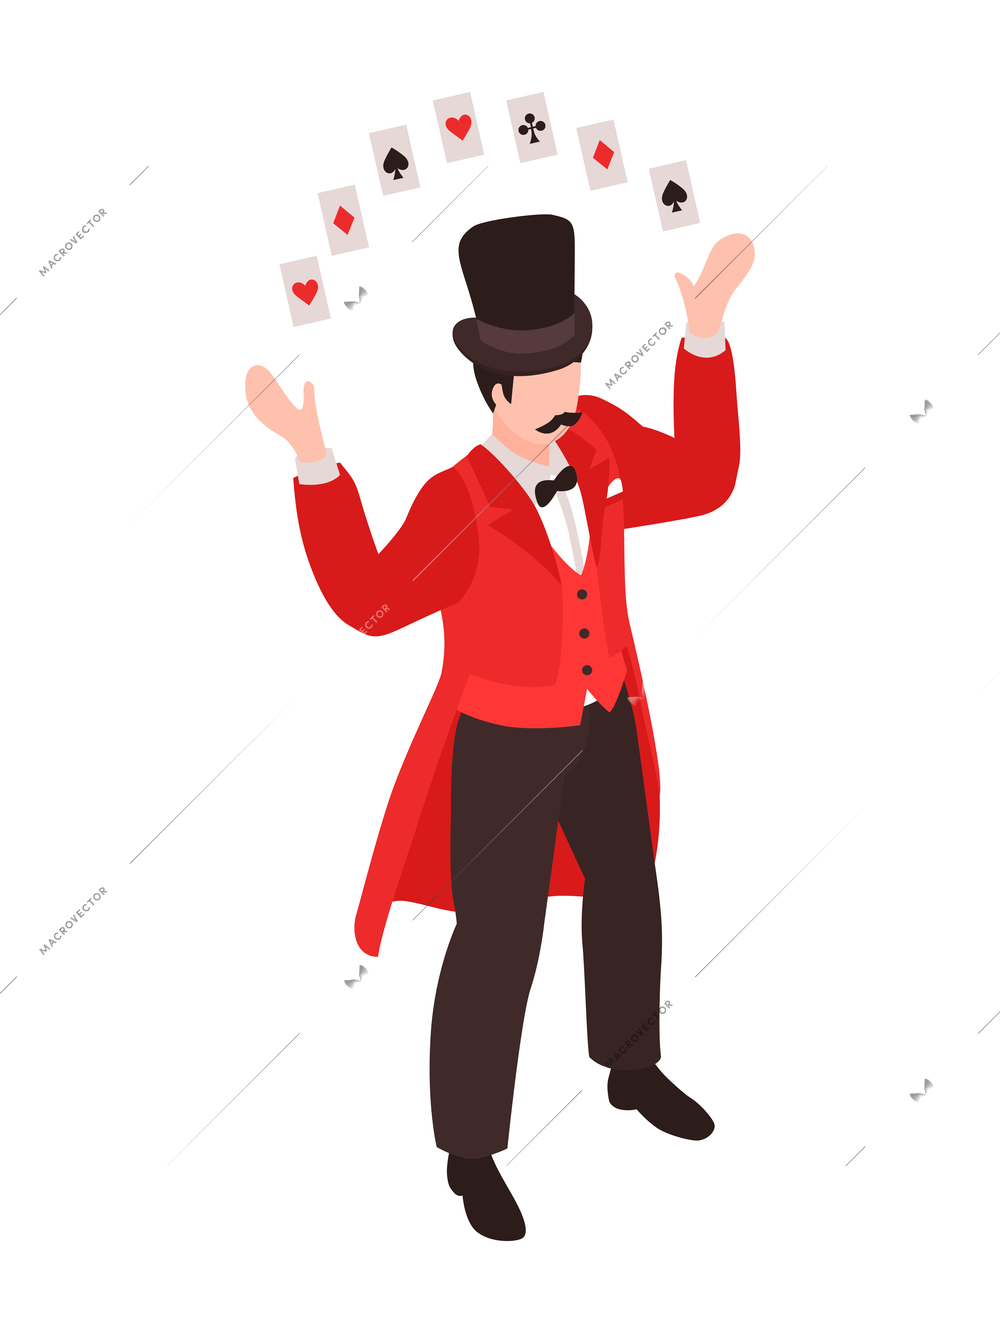 Isometric magician showing tricks focuses composition with human character raising hands with row of gaming cards vector illustration